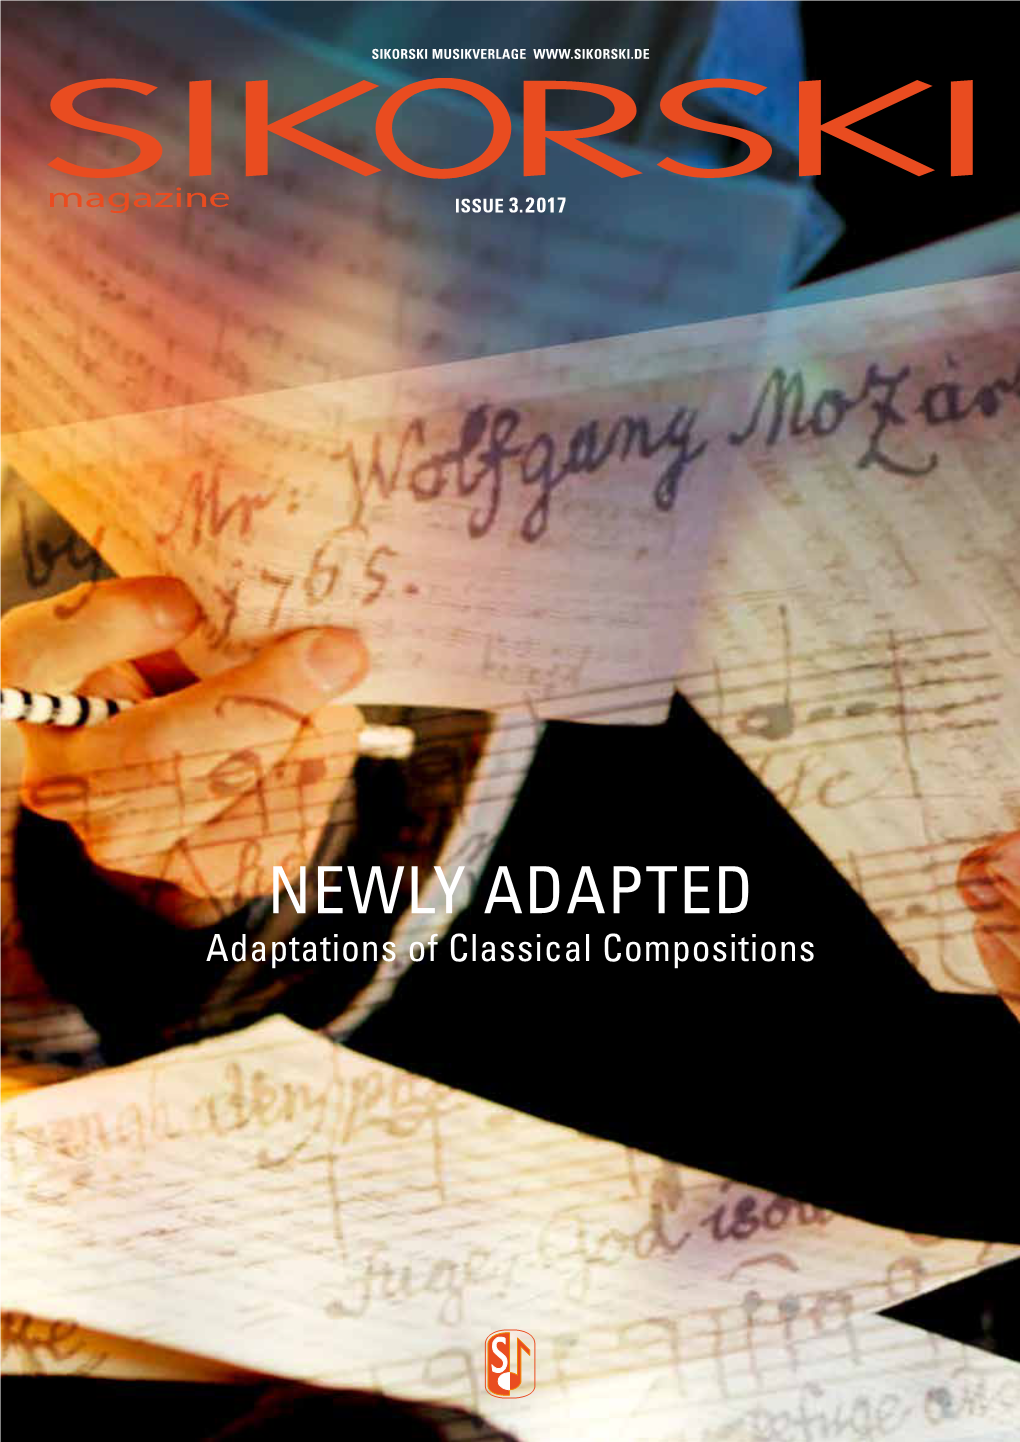 NEWLY ADAPTED Adaptations of Classical Compositions — EDITORIAL —